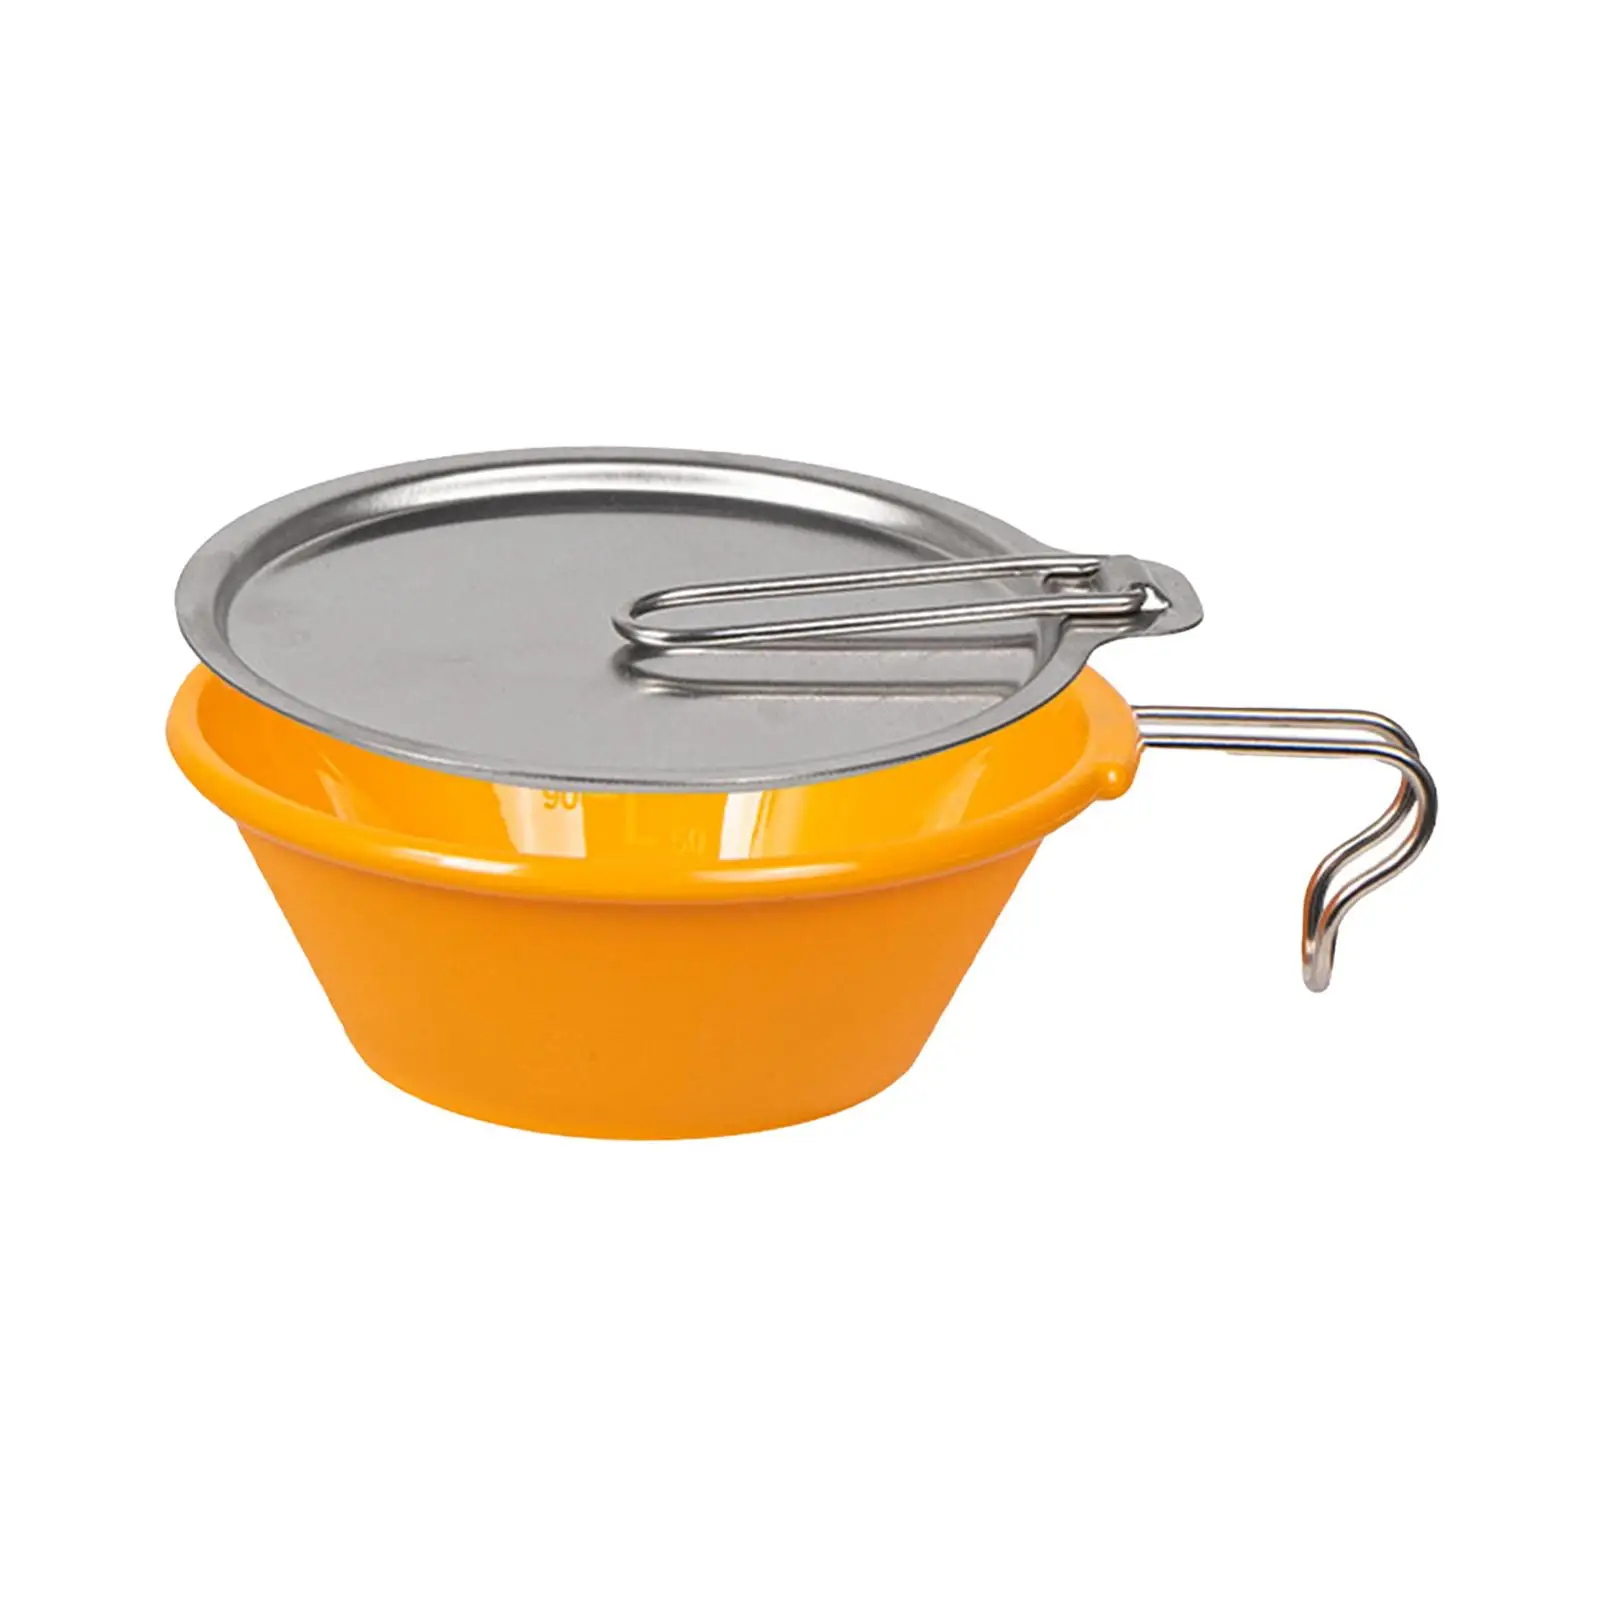 Camping Bowl with Lids and Handle Dessert Bowl Tableware Food Bowl Outdoor Cookware for BBQ Trekking Fishing Barbecue